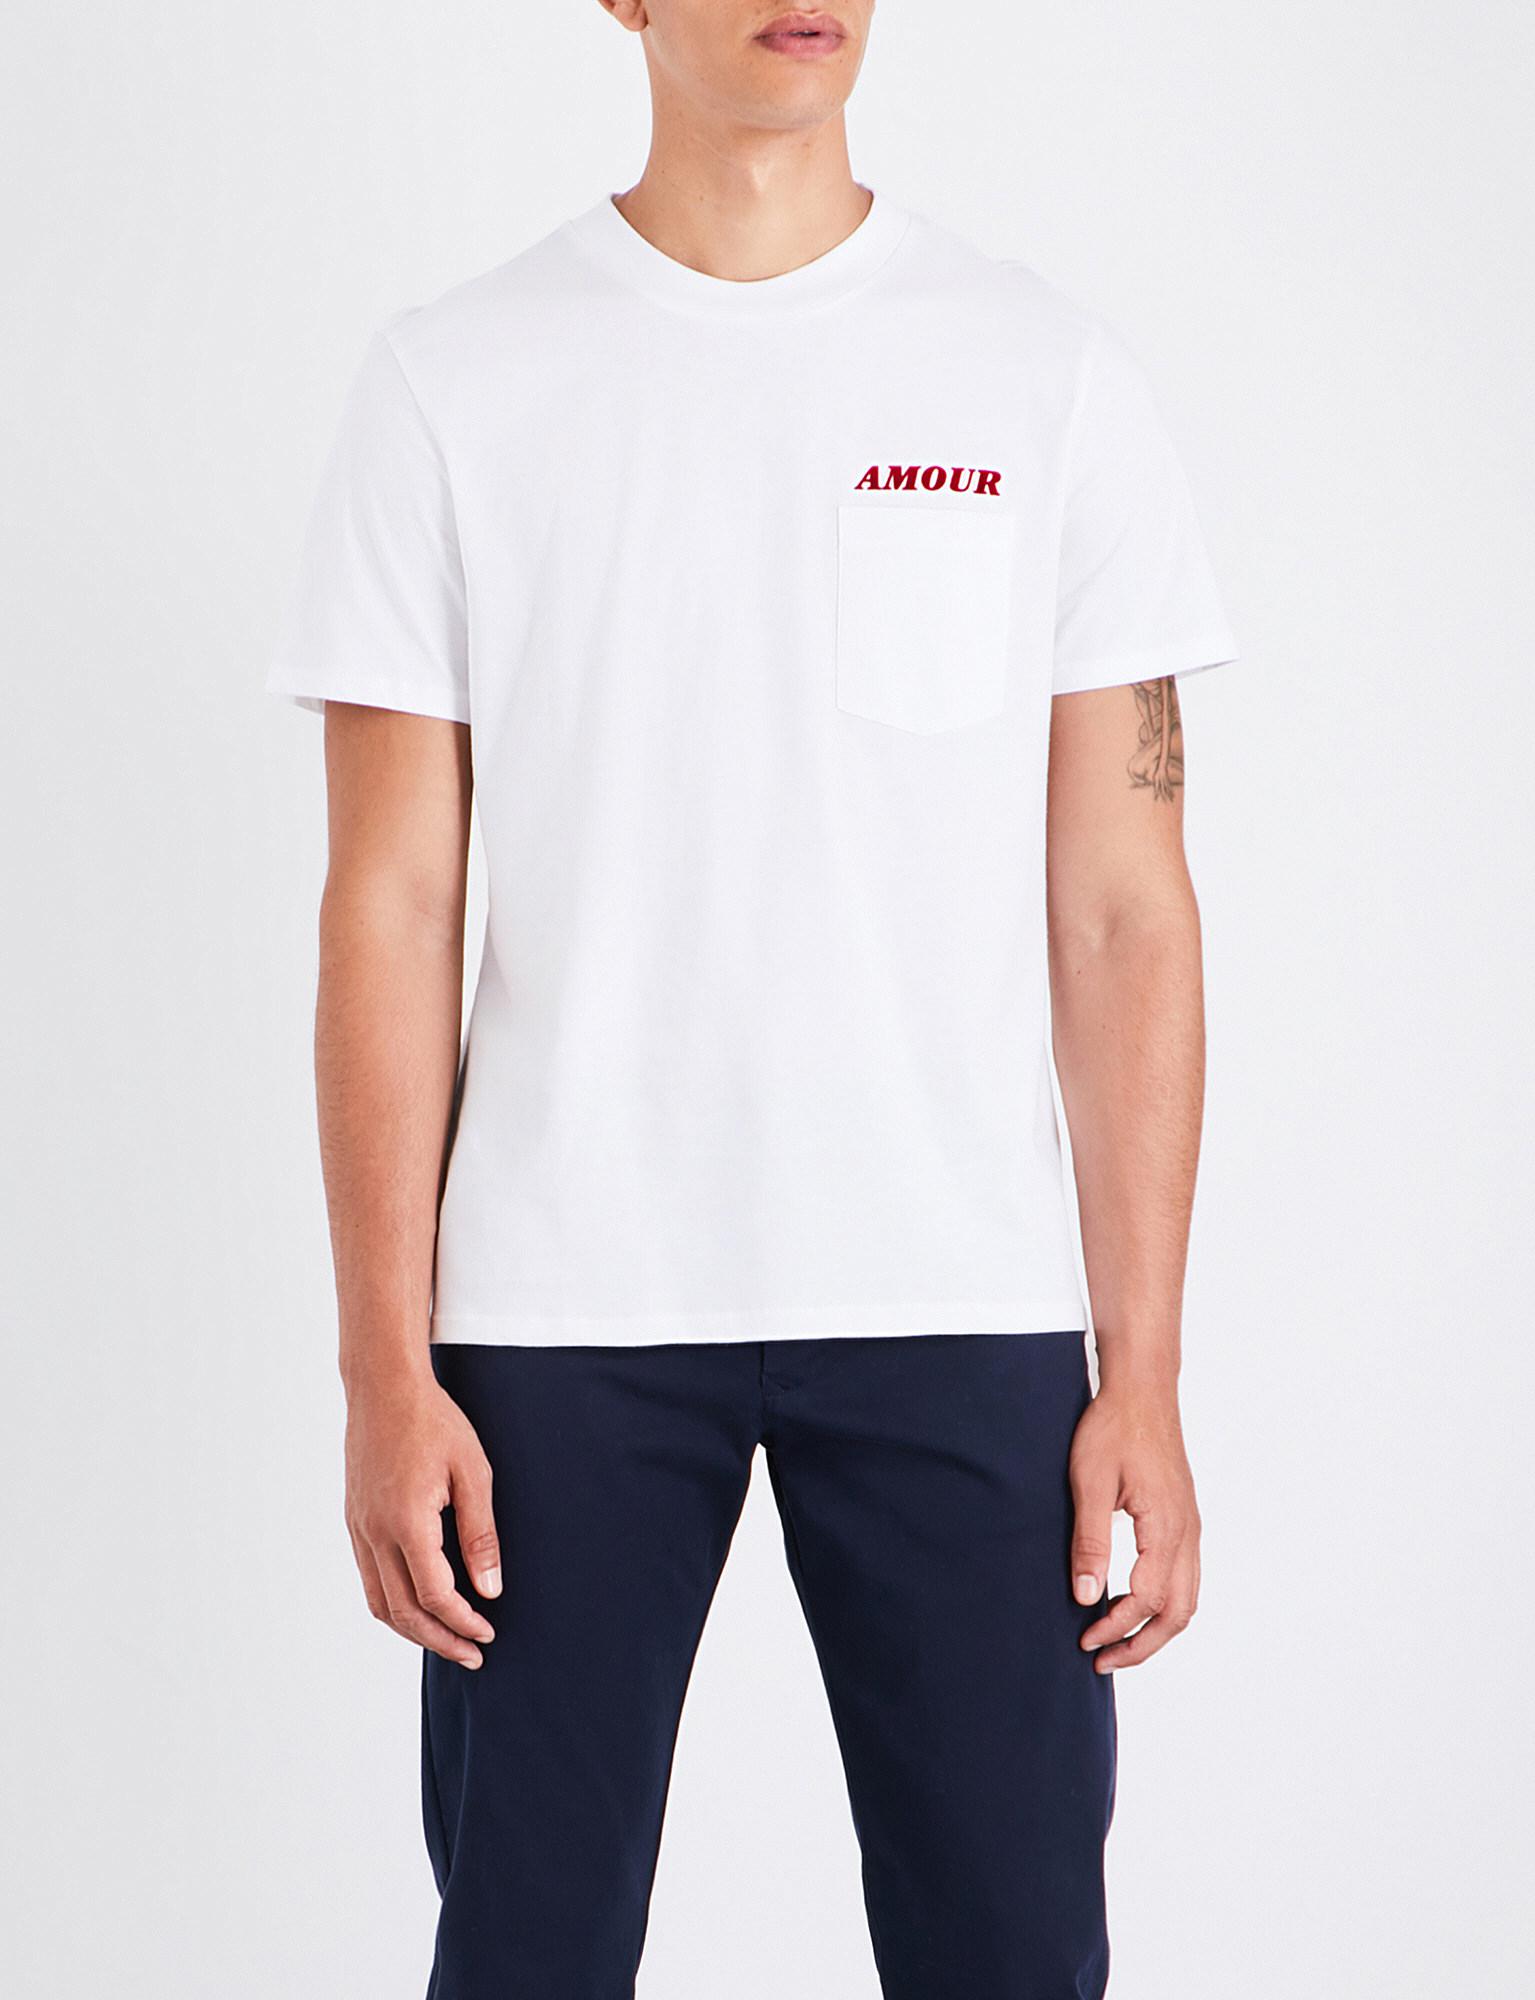 Sandro Amour Cotton T-shirt in White for Men - Lyst